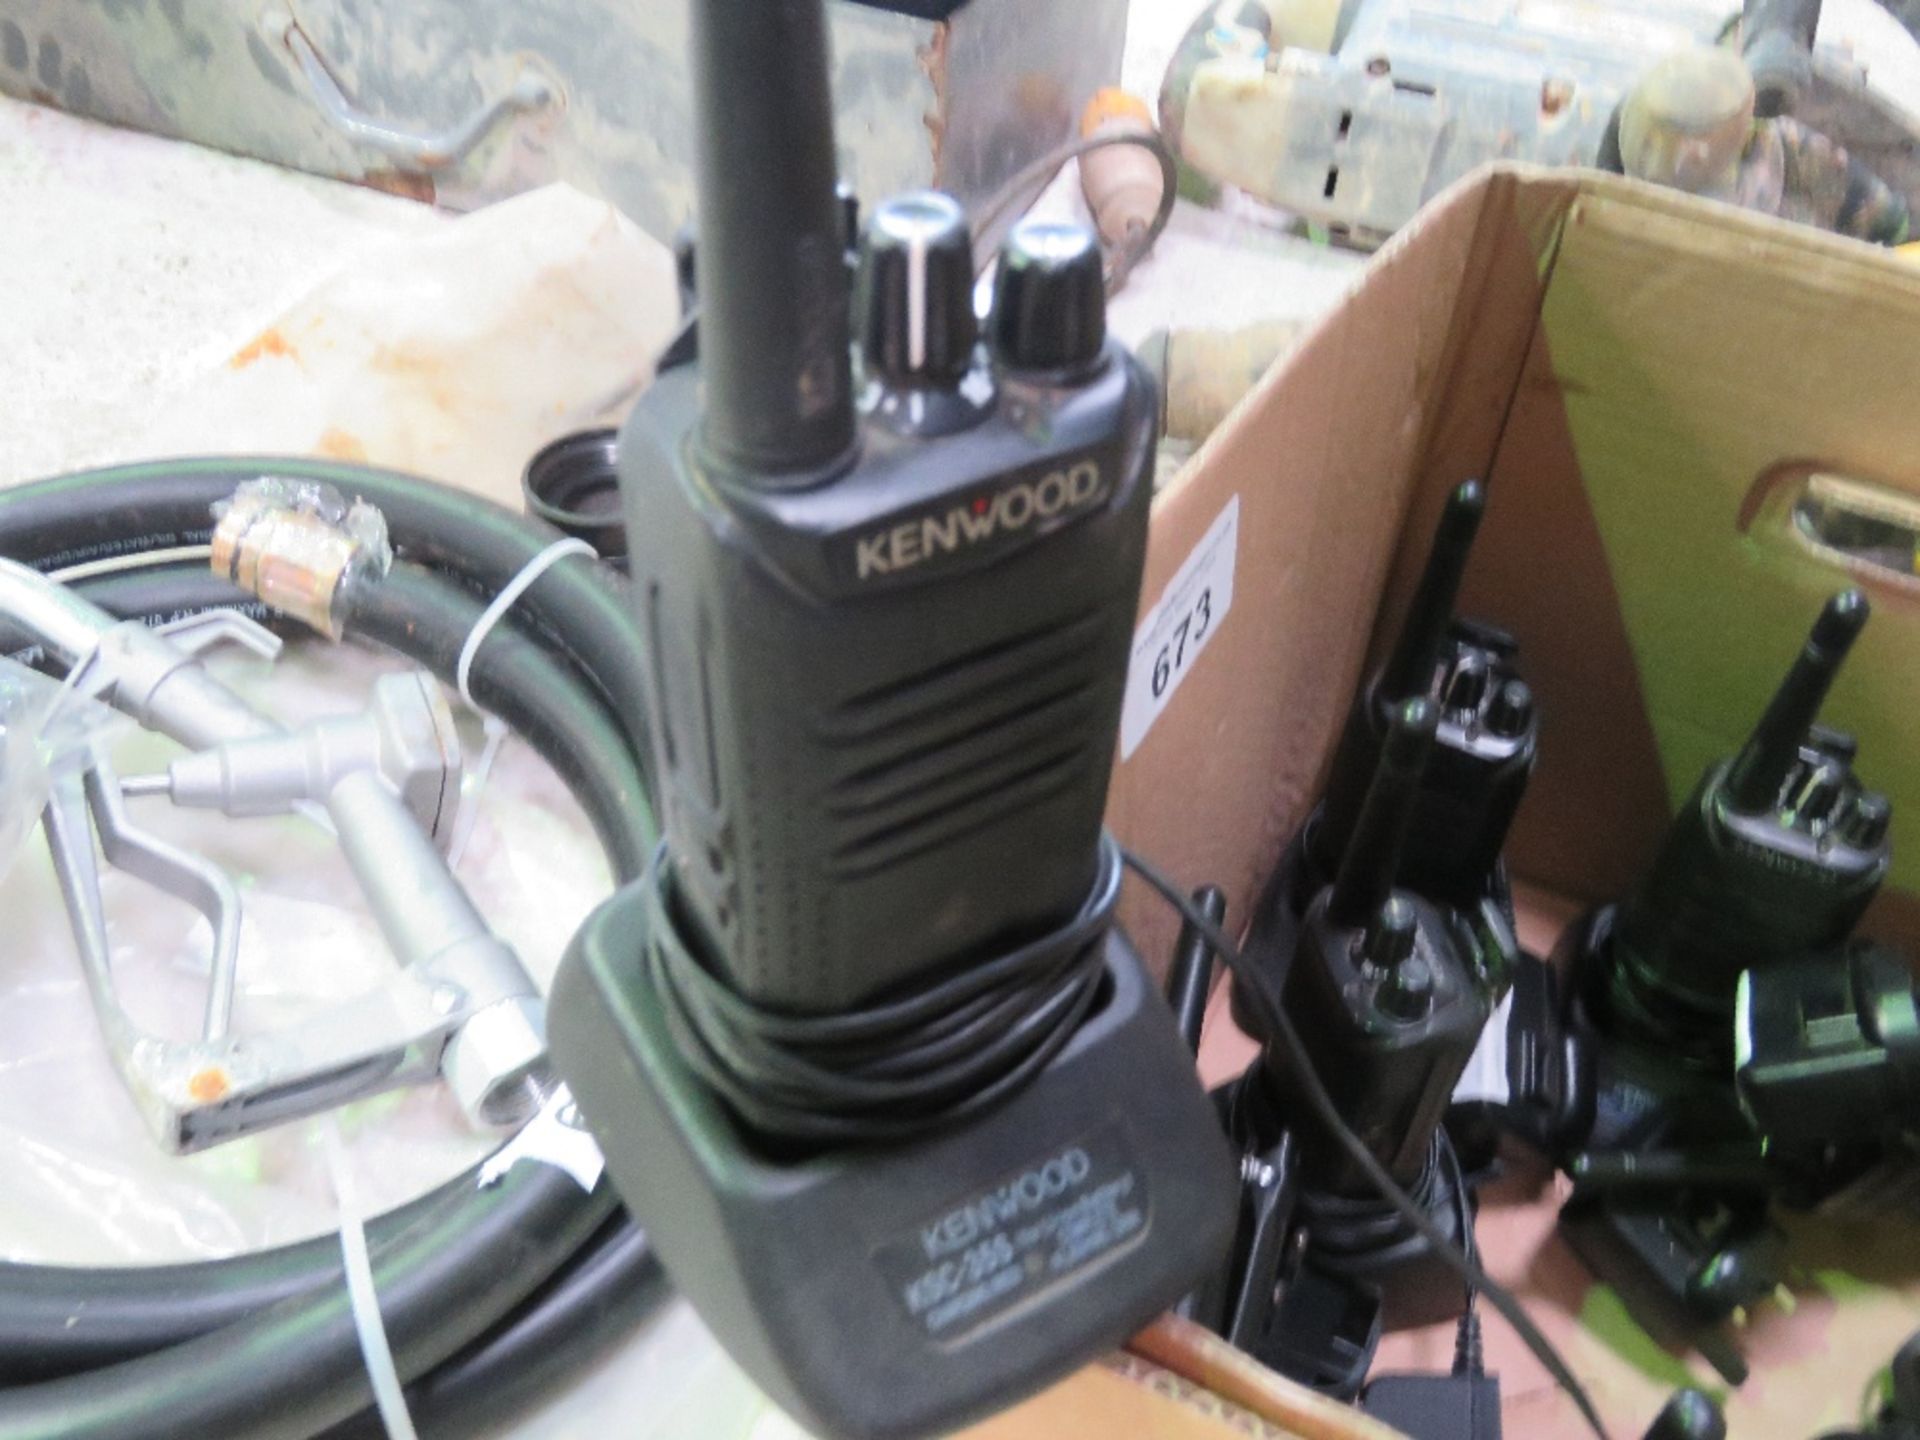 9NO KENWOOD WALKIE TALKIE RADIOS WITH CHARGERS. DIRECT FROM SITE CLOSURE. WORKING WHEN REMOVED. T - Image 3 of 4